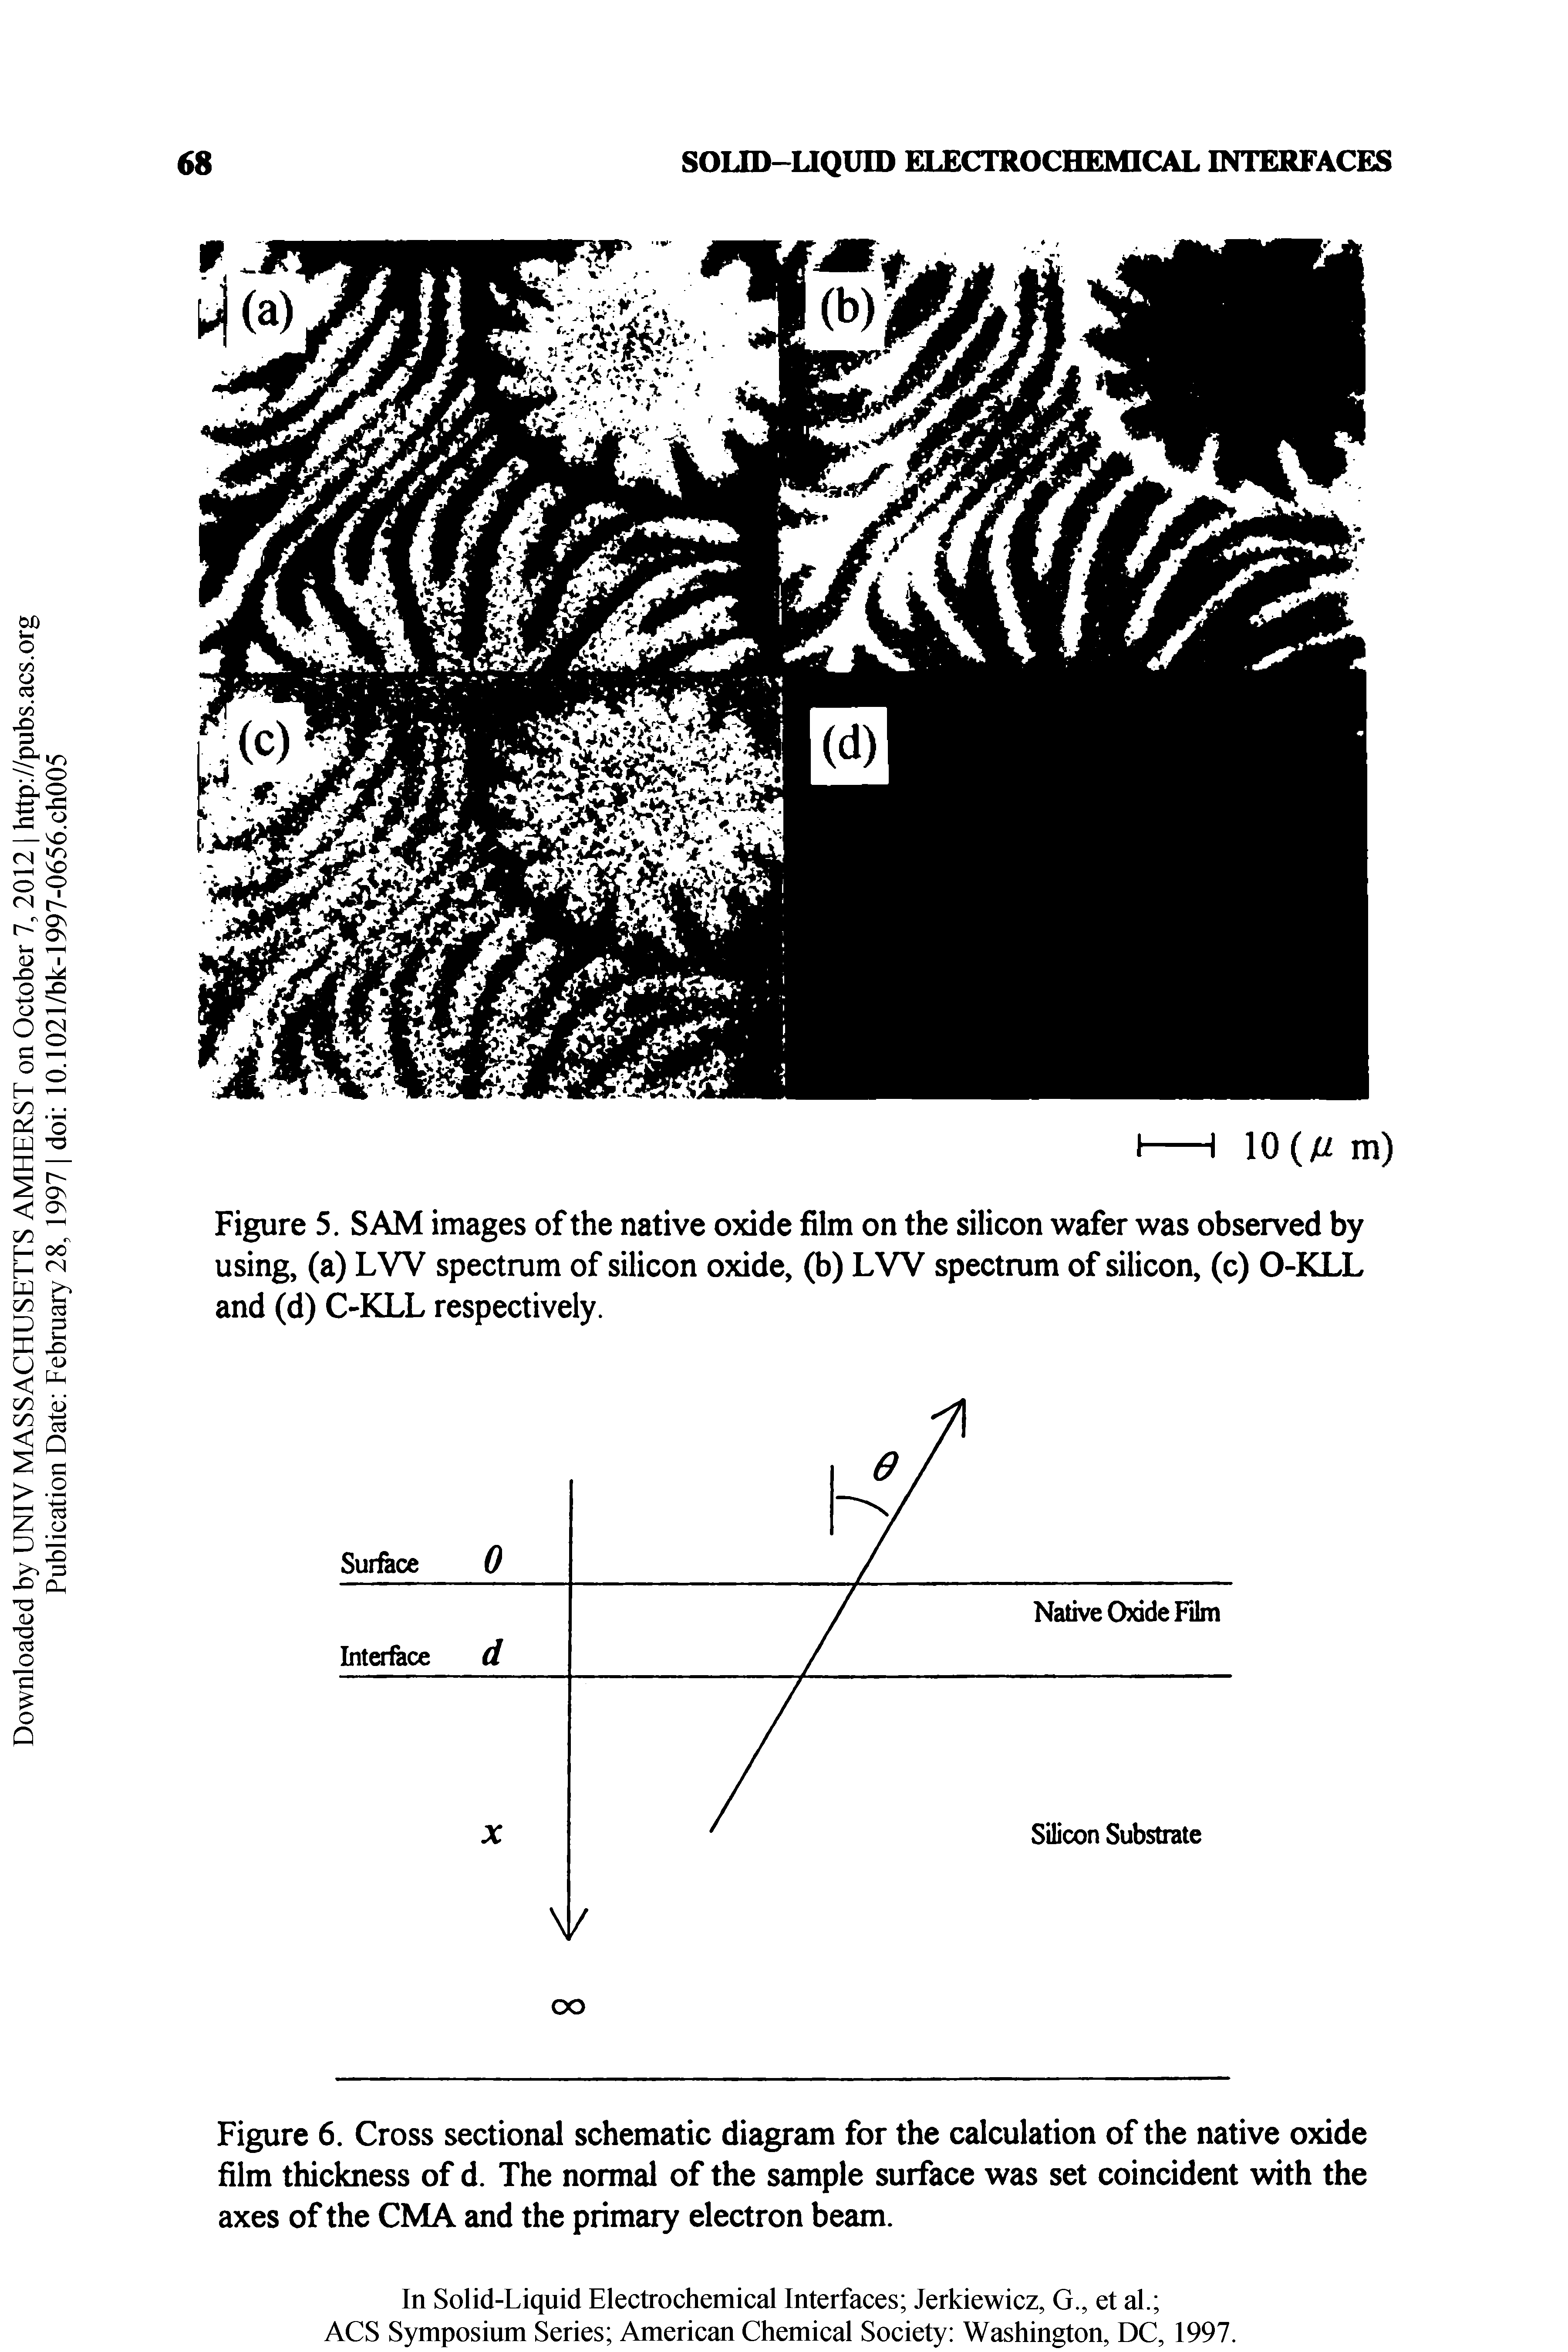 Figure 6. Cross sectional schematic diagram for the calculation of the native oxide film thickness of d. The normal of the sample surface was set coincident with the axes of the CMA and the primary electron beam.